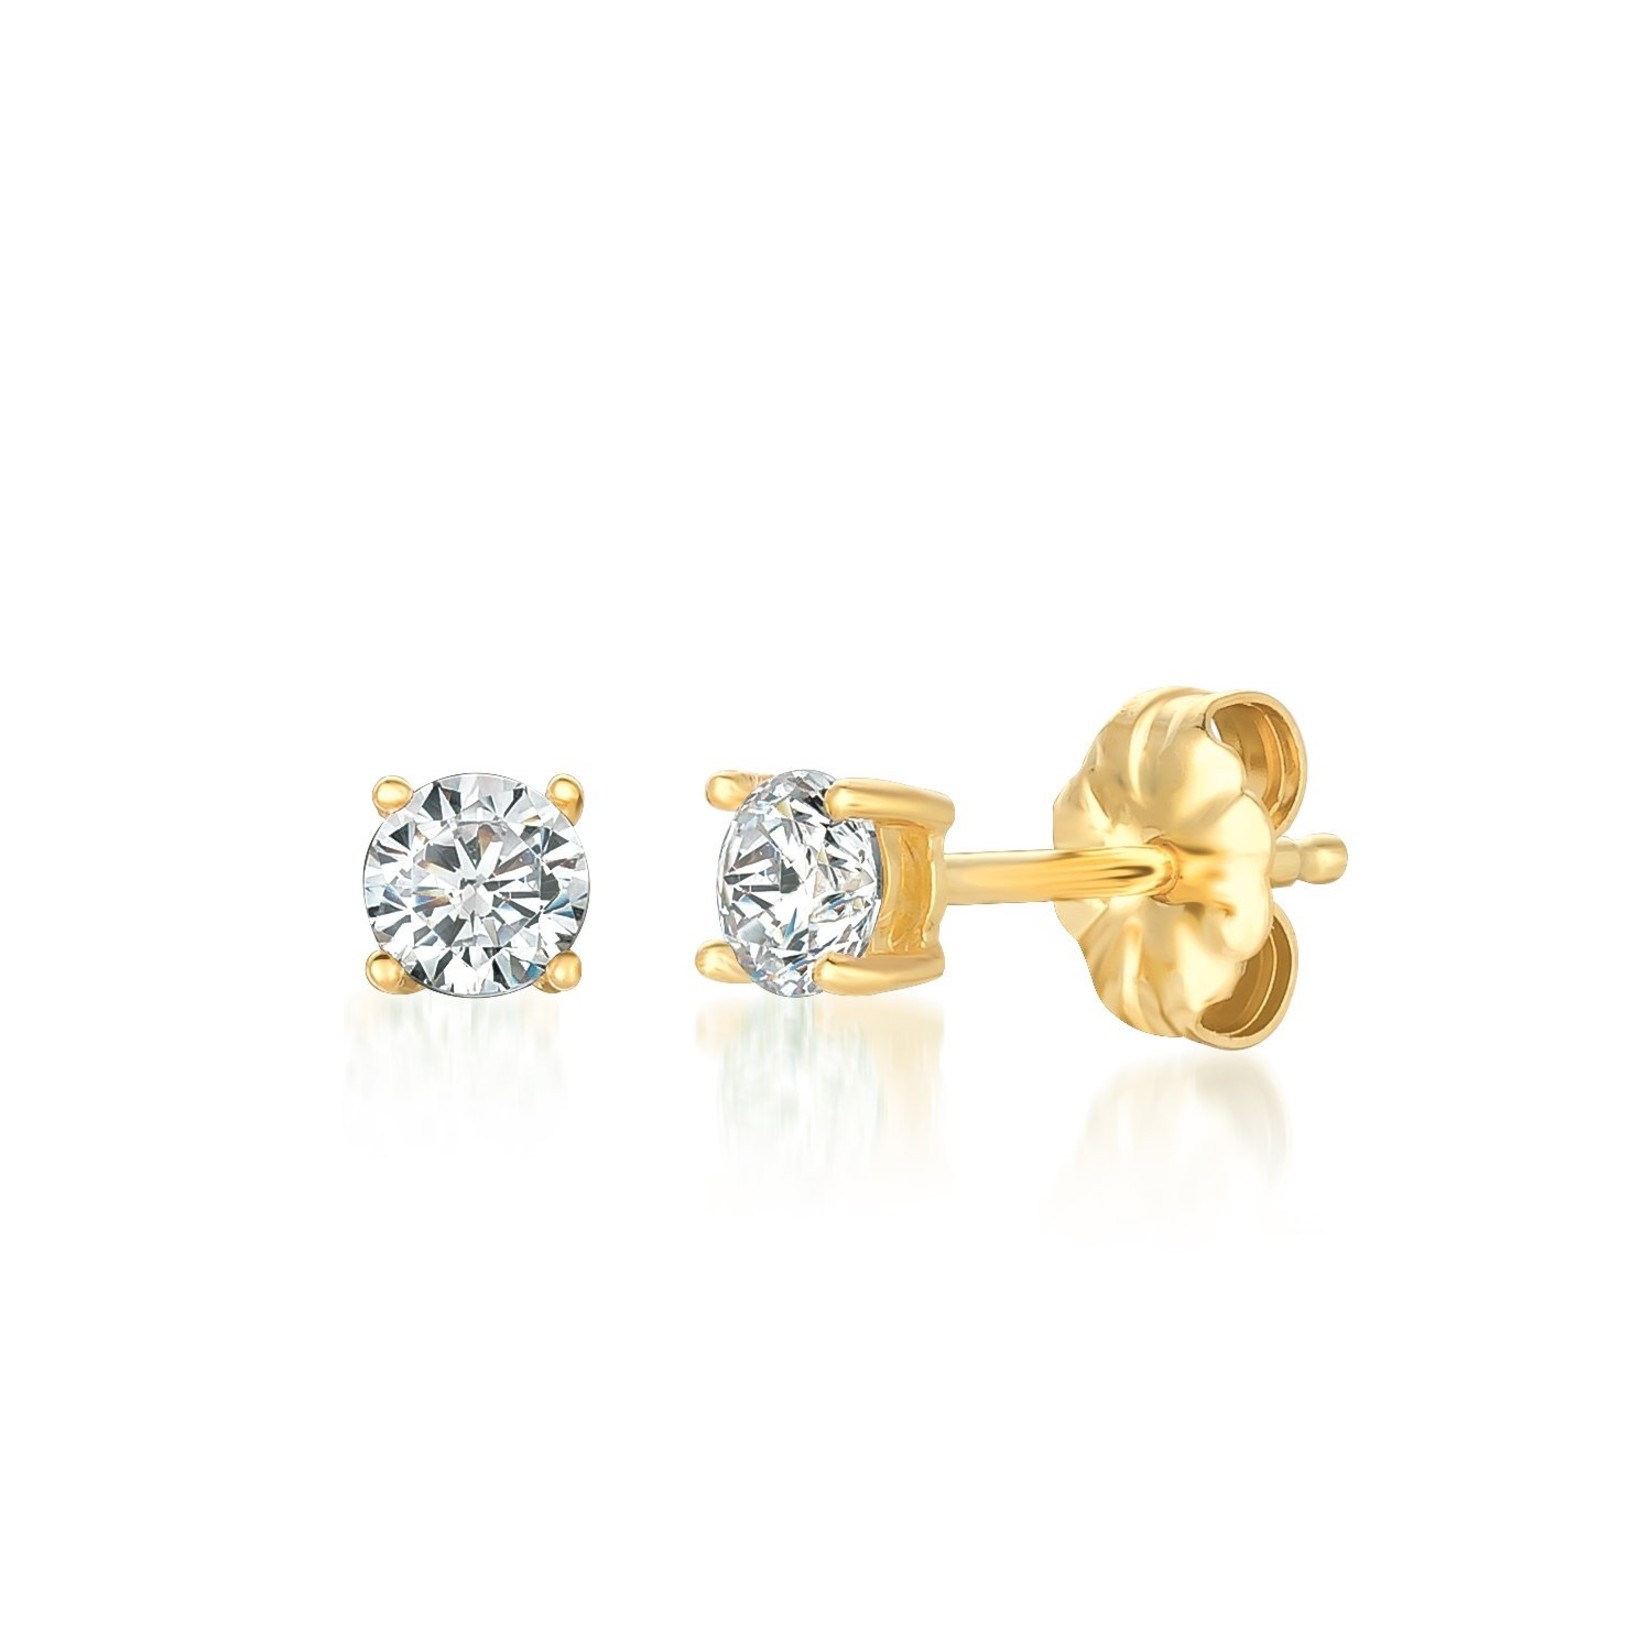 Crislu Solitaire Brilliant Stud Earrings Finished in 18kt Yellow Gold .50 CTW 300162E00CZ